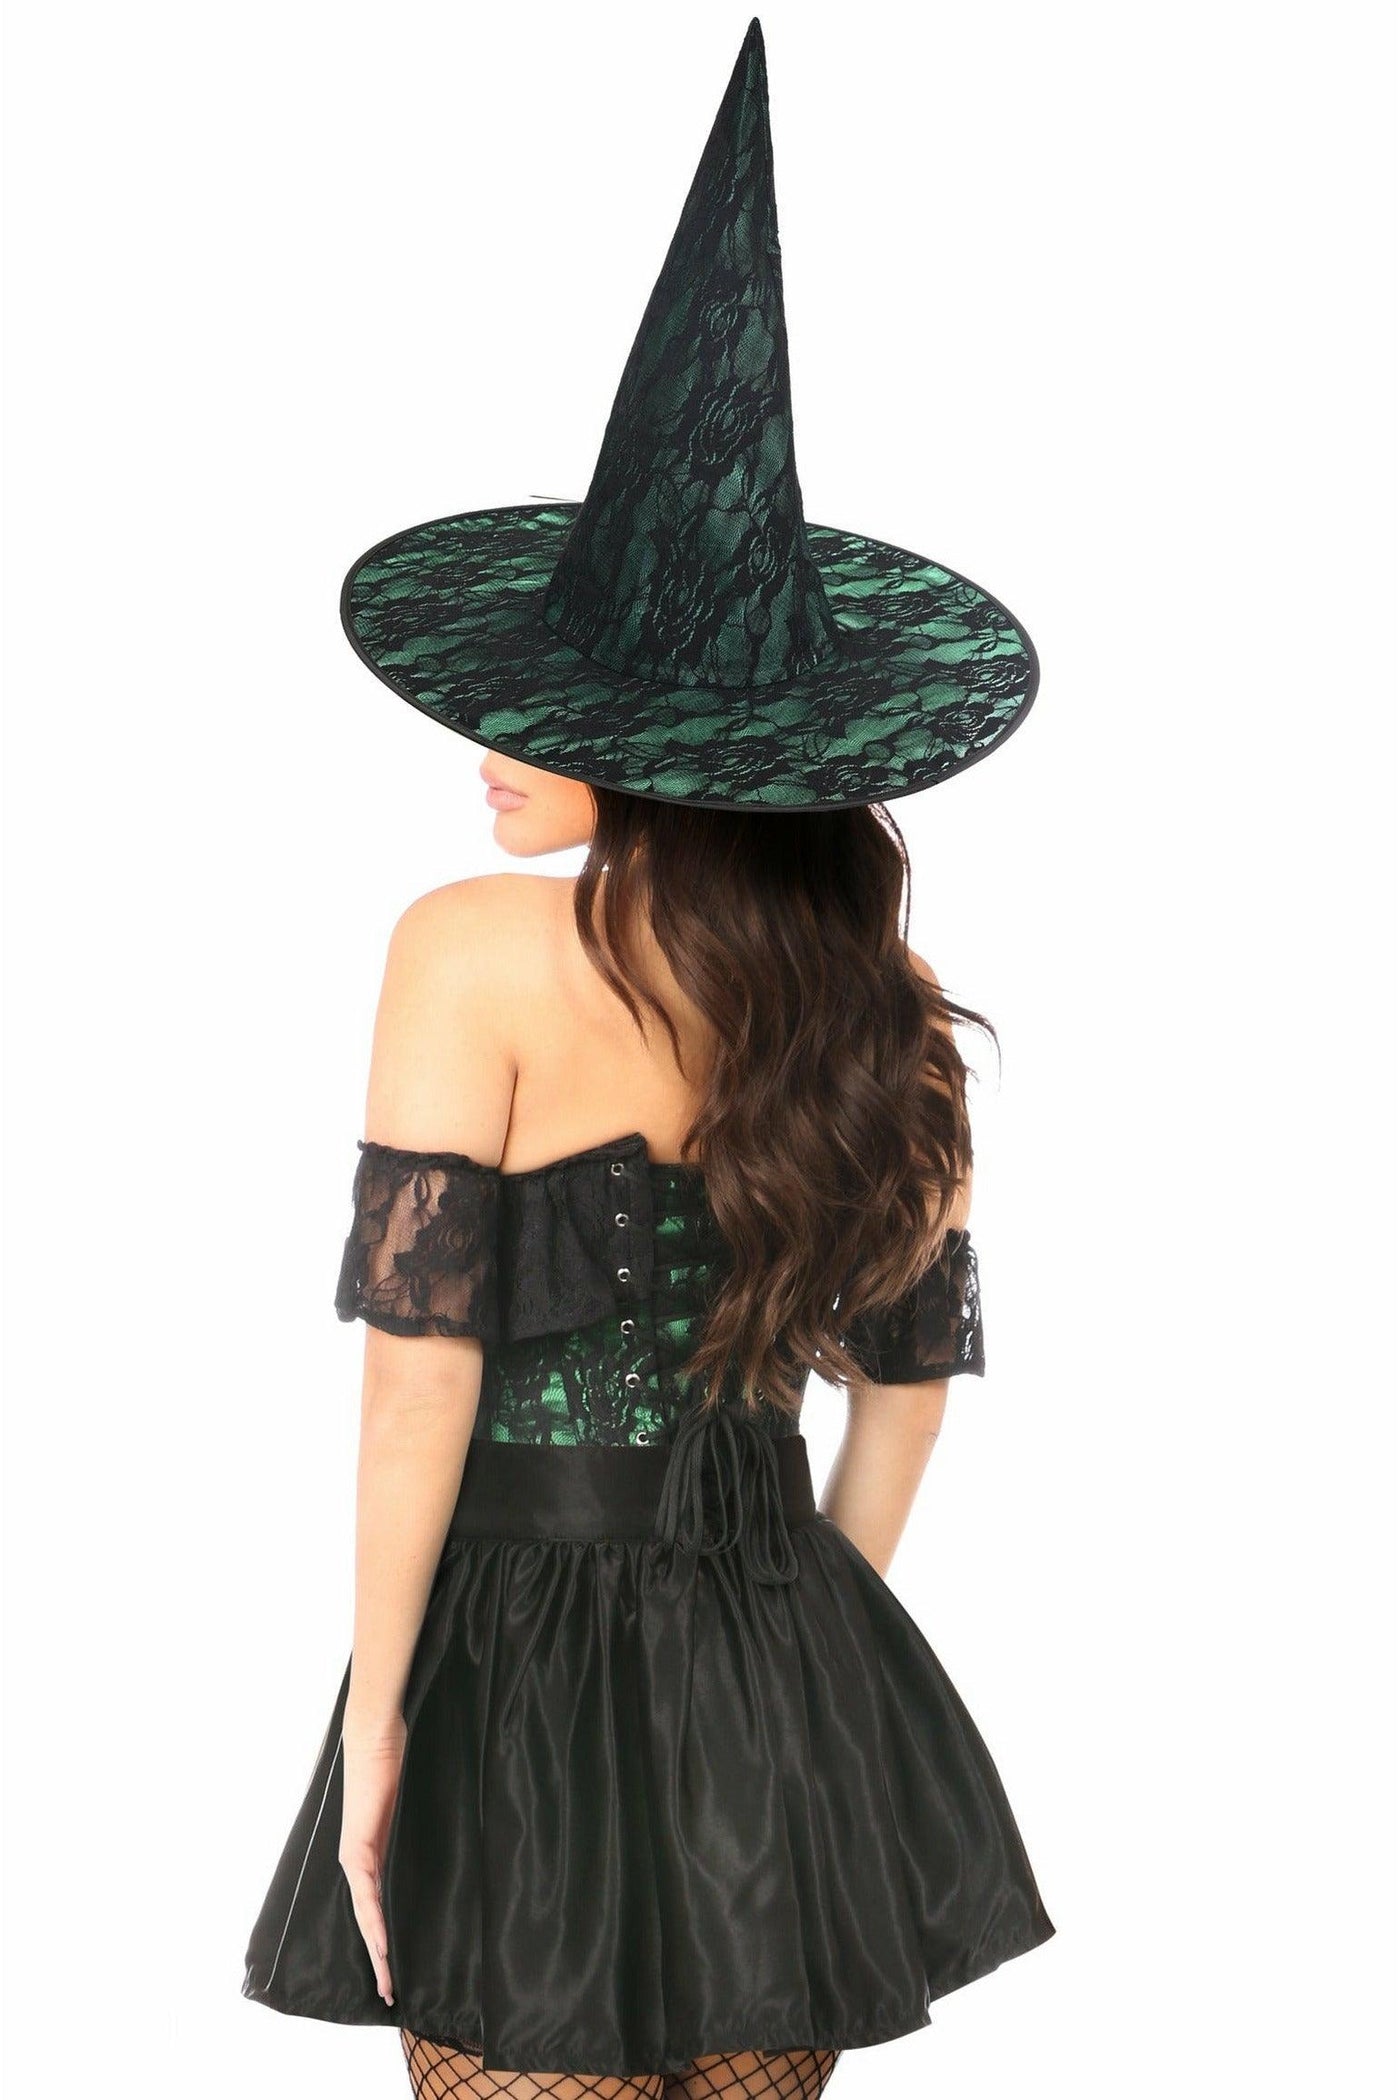 Lavish 3 PC Green Lace Off The Shoulder Witch Corset Costume - AMIClubwear